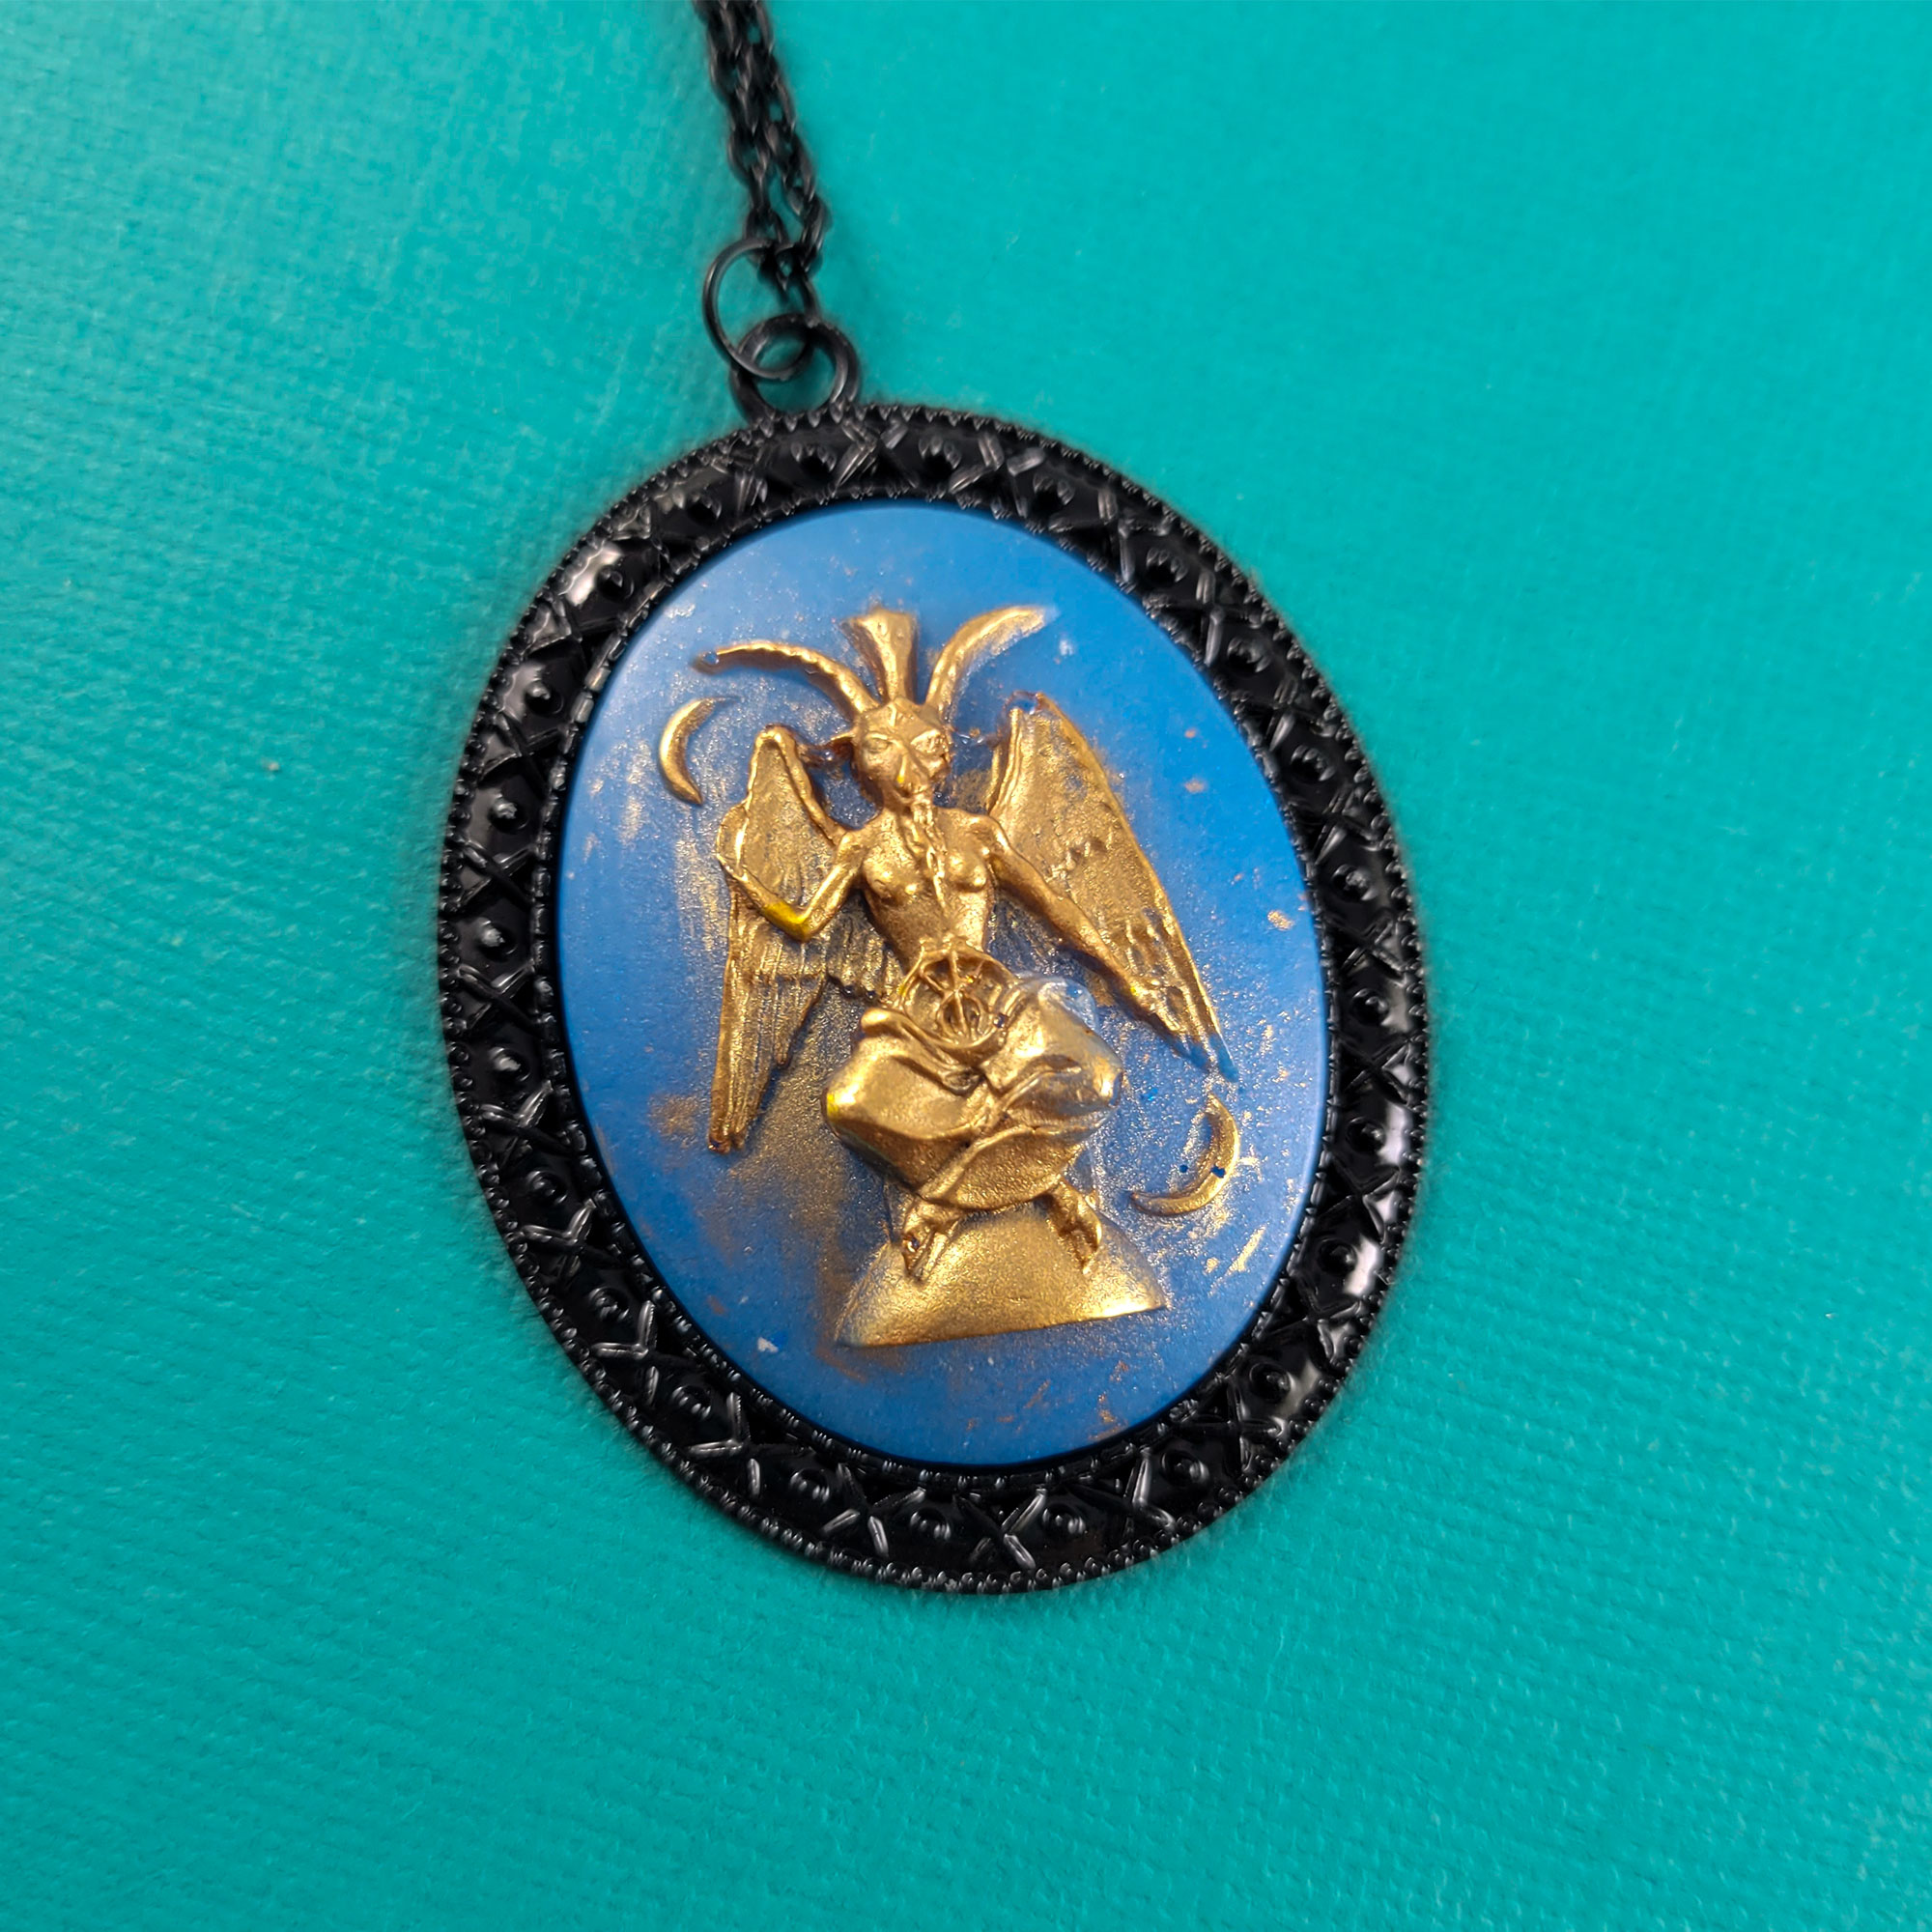 Baphomet Cameo Necklace by Wilde Designs